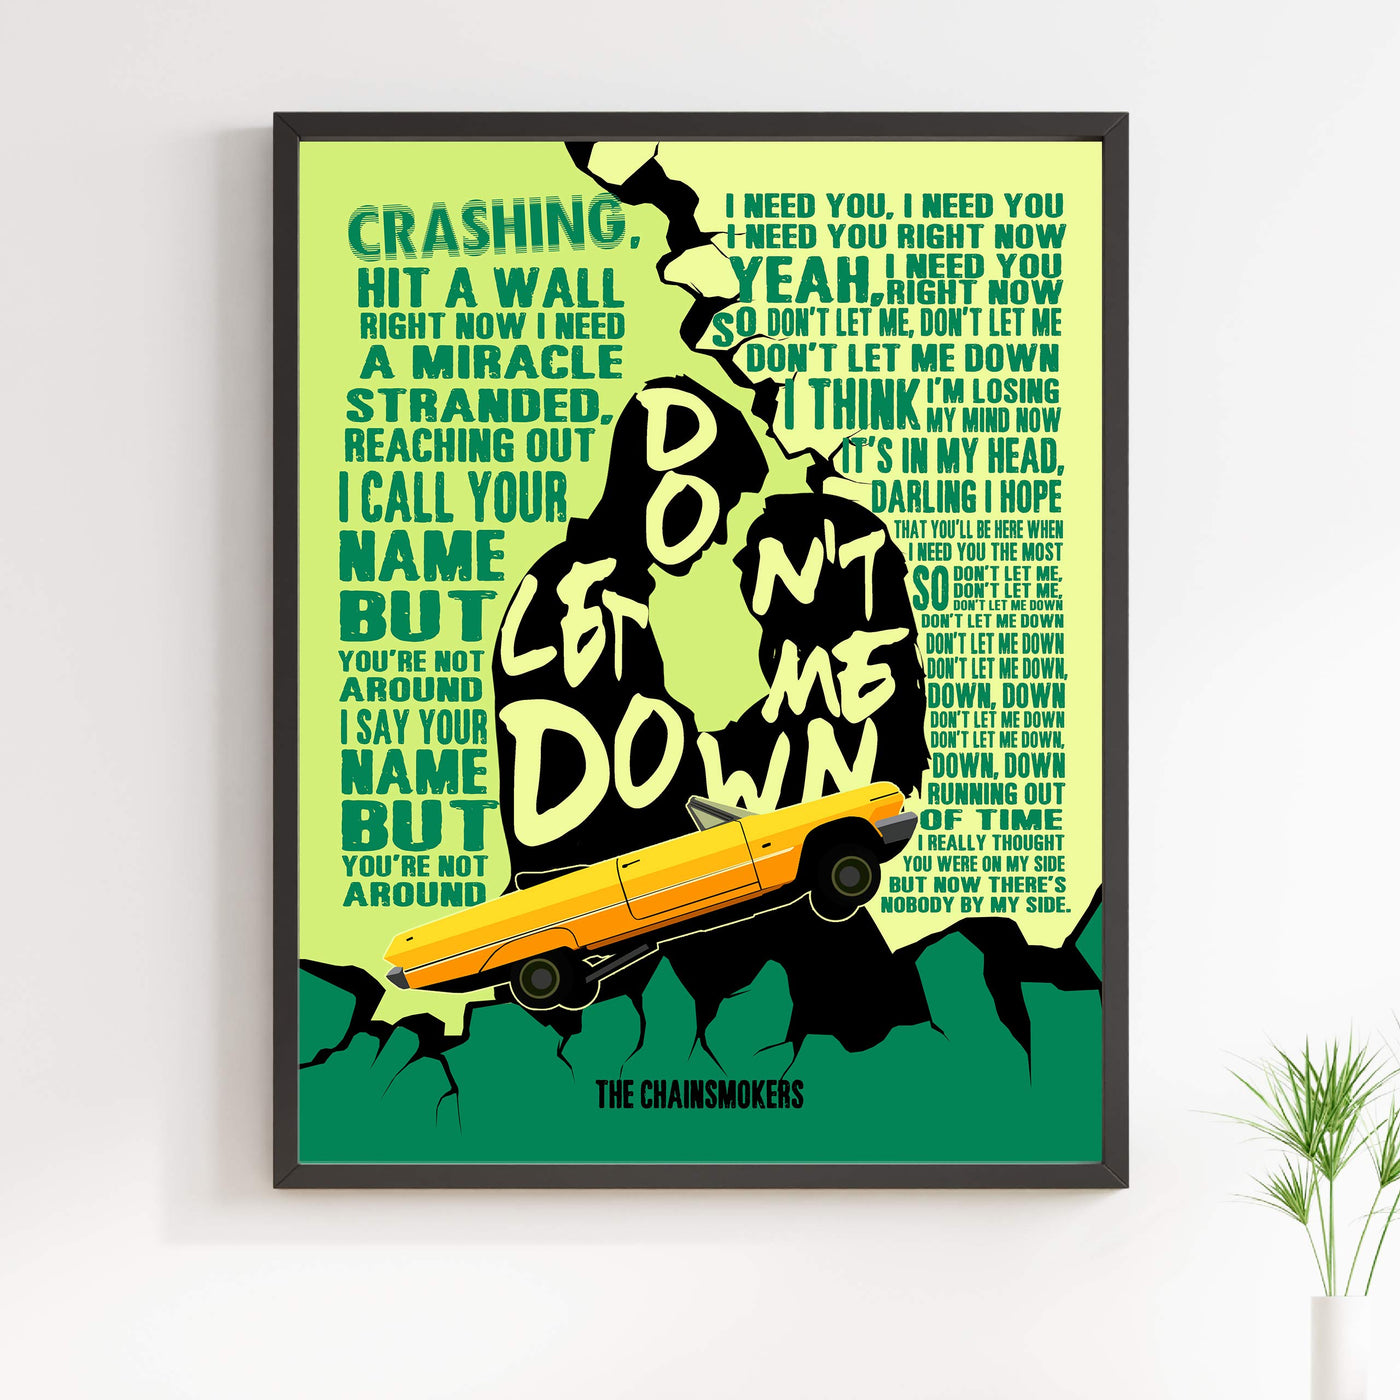 The Chainsmokers-"Don't Let Me Down"-Song Lyric Wall Print -11 x 14" Rock Music Word Art w/Yellow Convertible Image-Ready to Frame. Home-Studio-Bar-Man Cave Decor. Perfect for Pop Rock-Remix Fans!